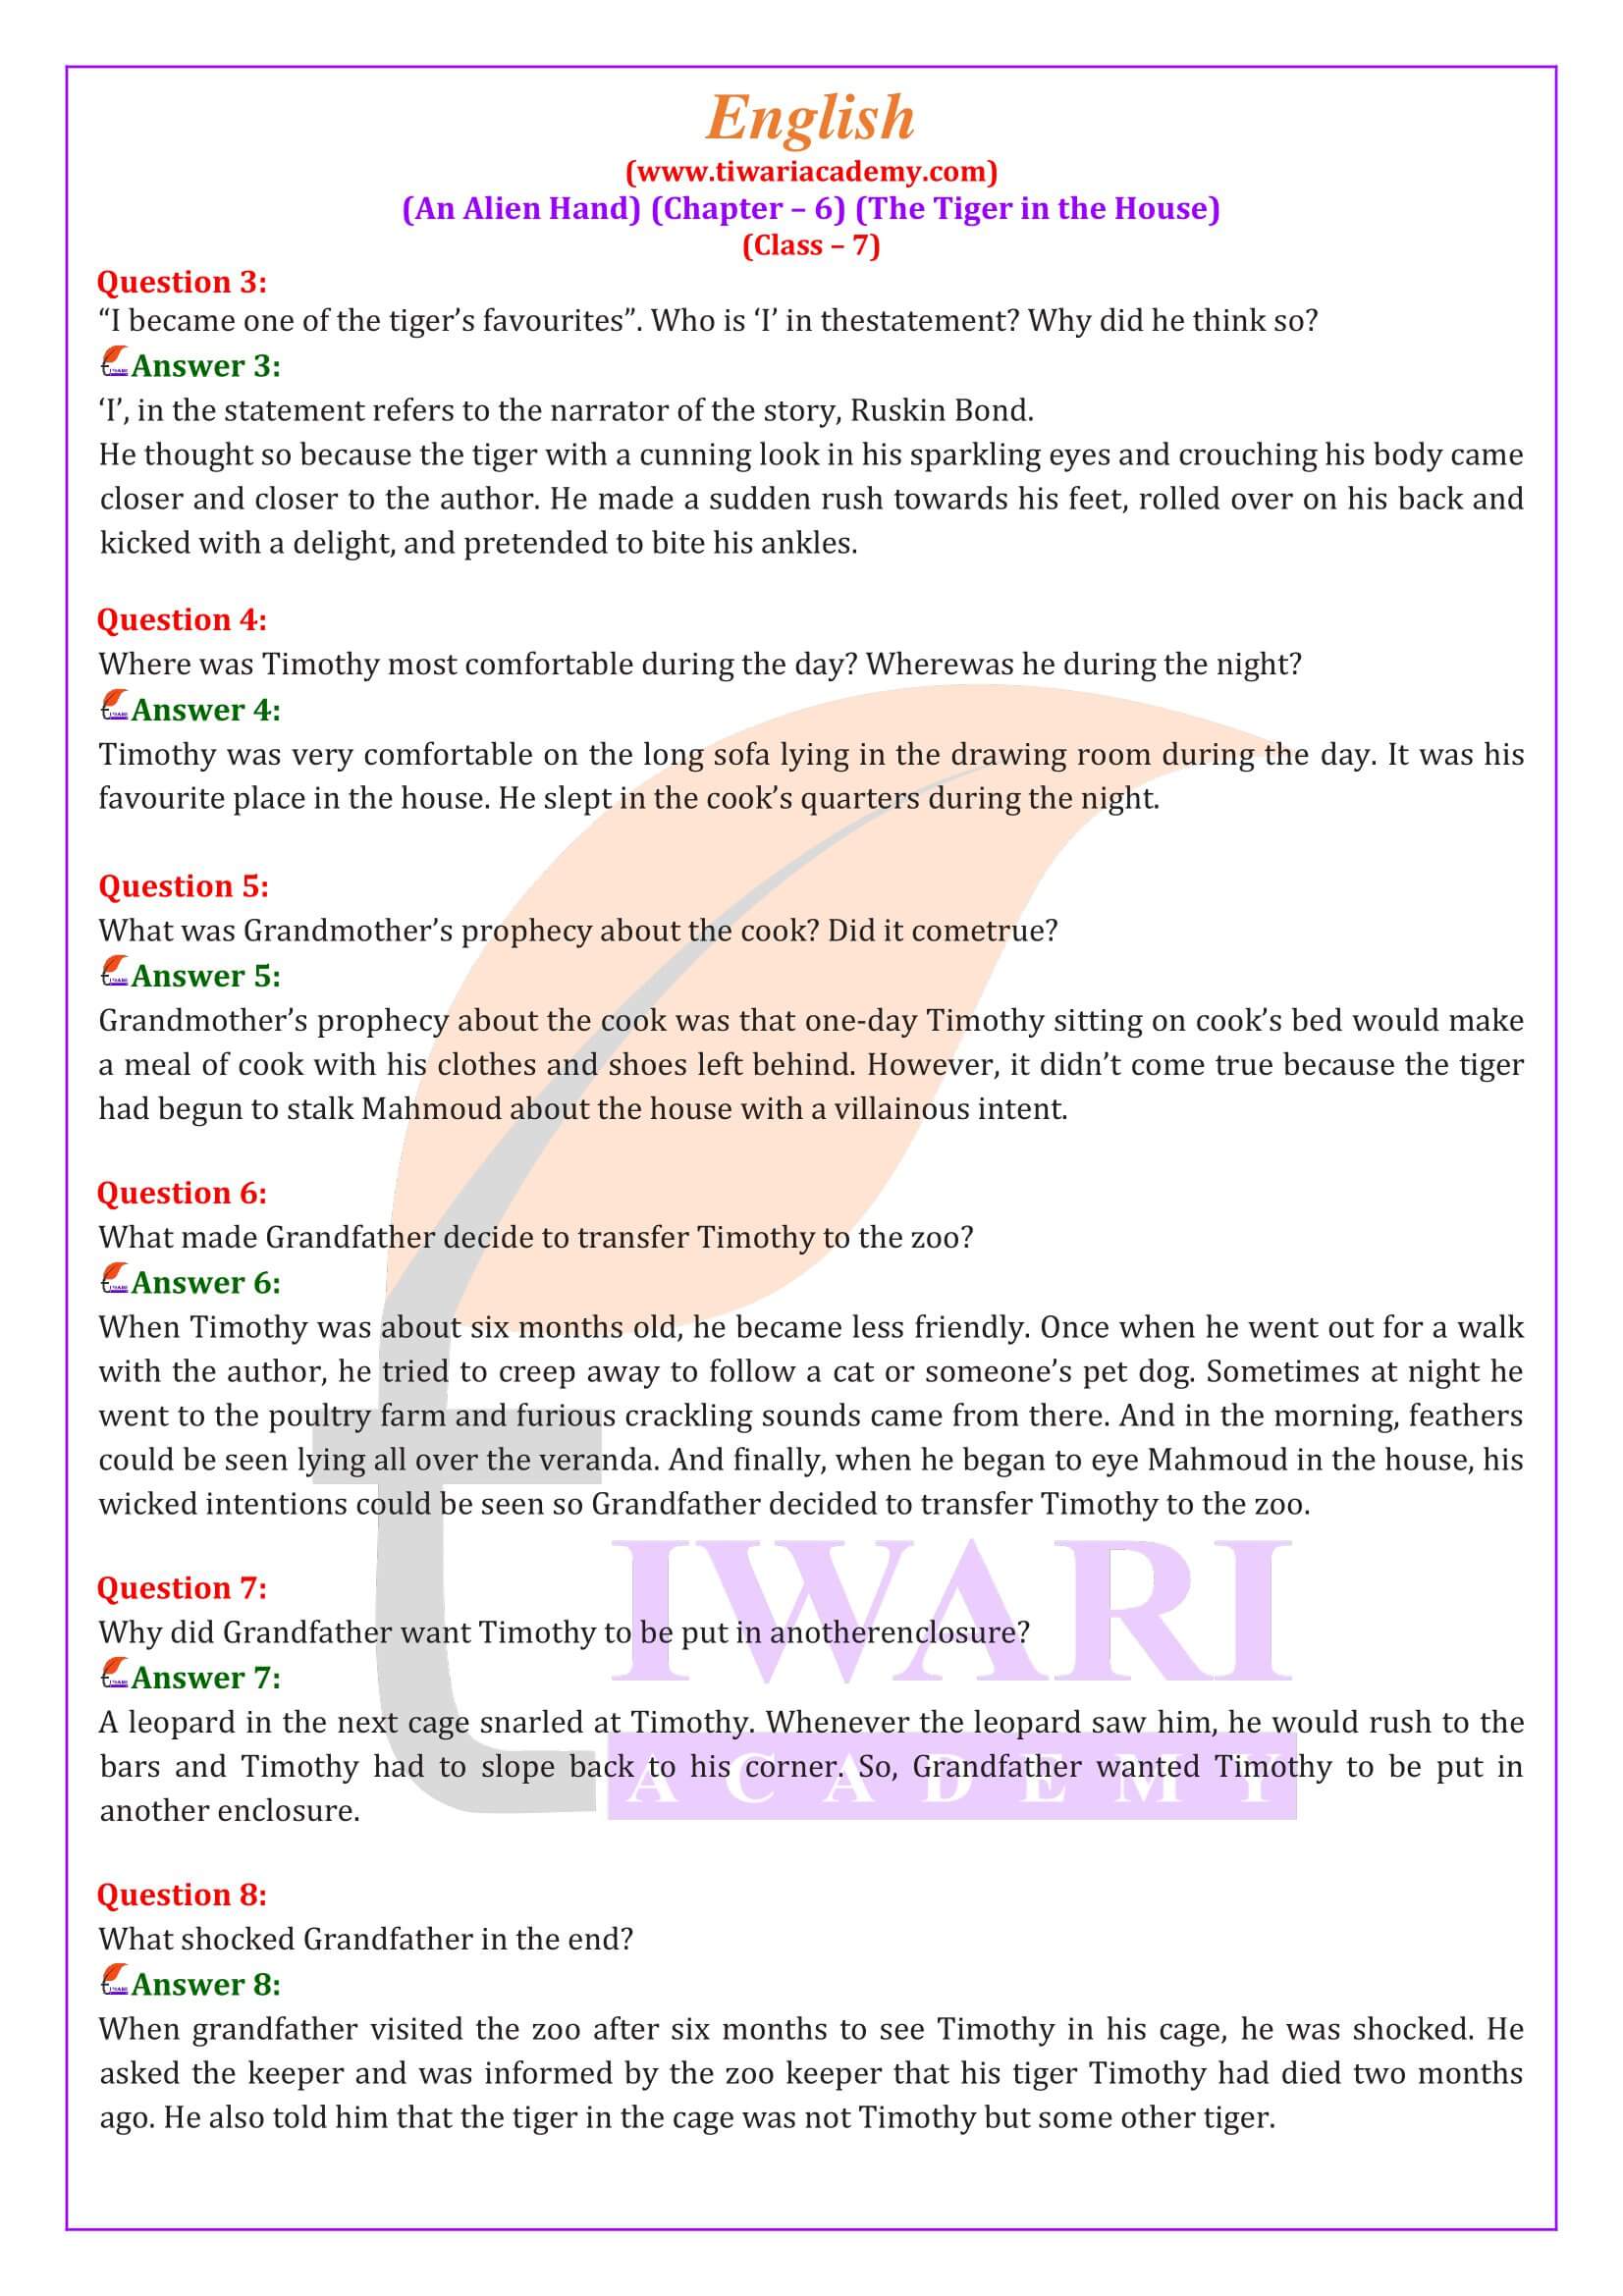 Class 7 English an Alien Hand Chapter 6 Question Answers